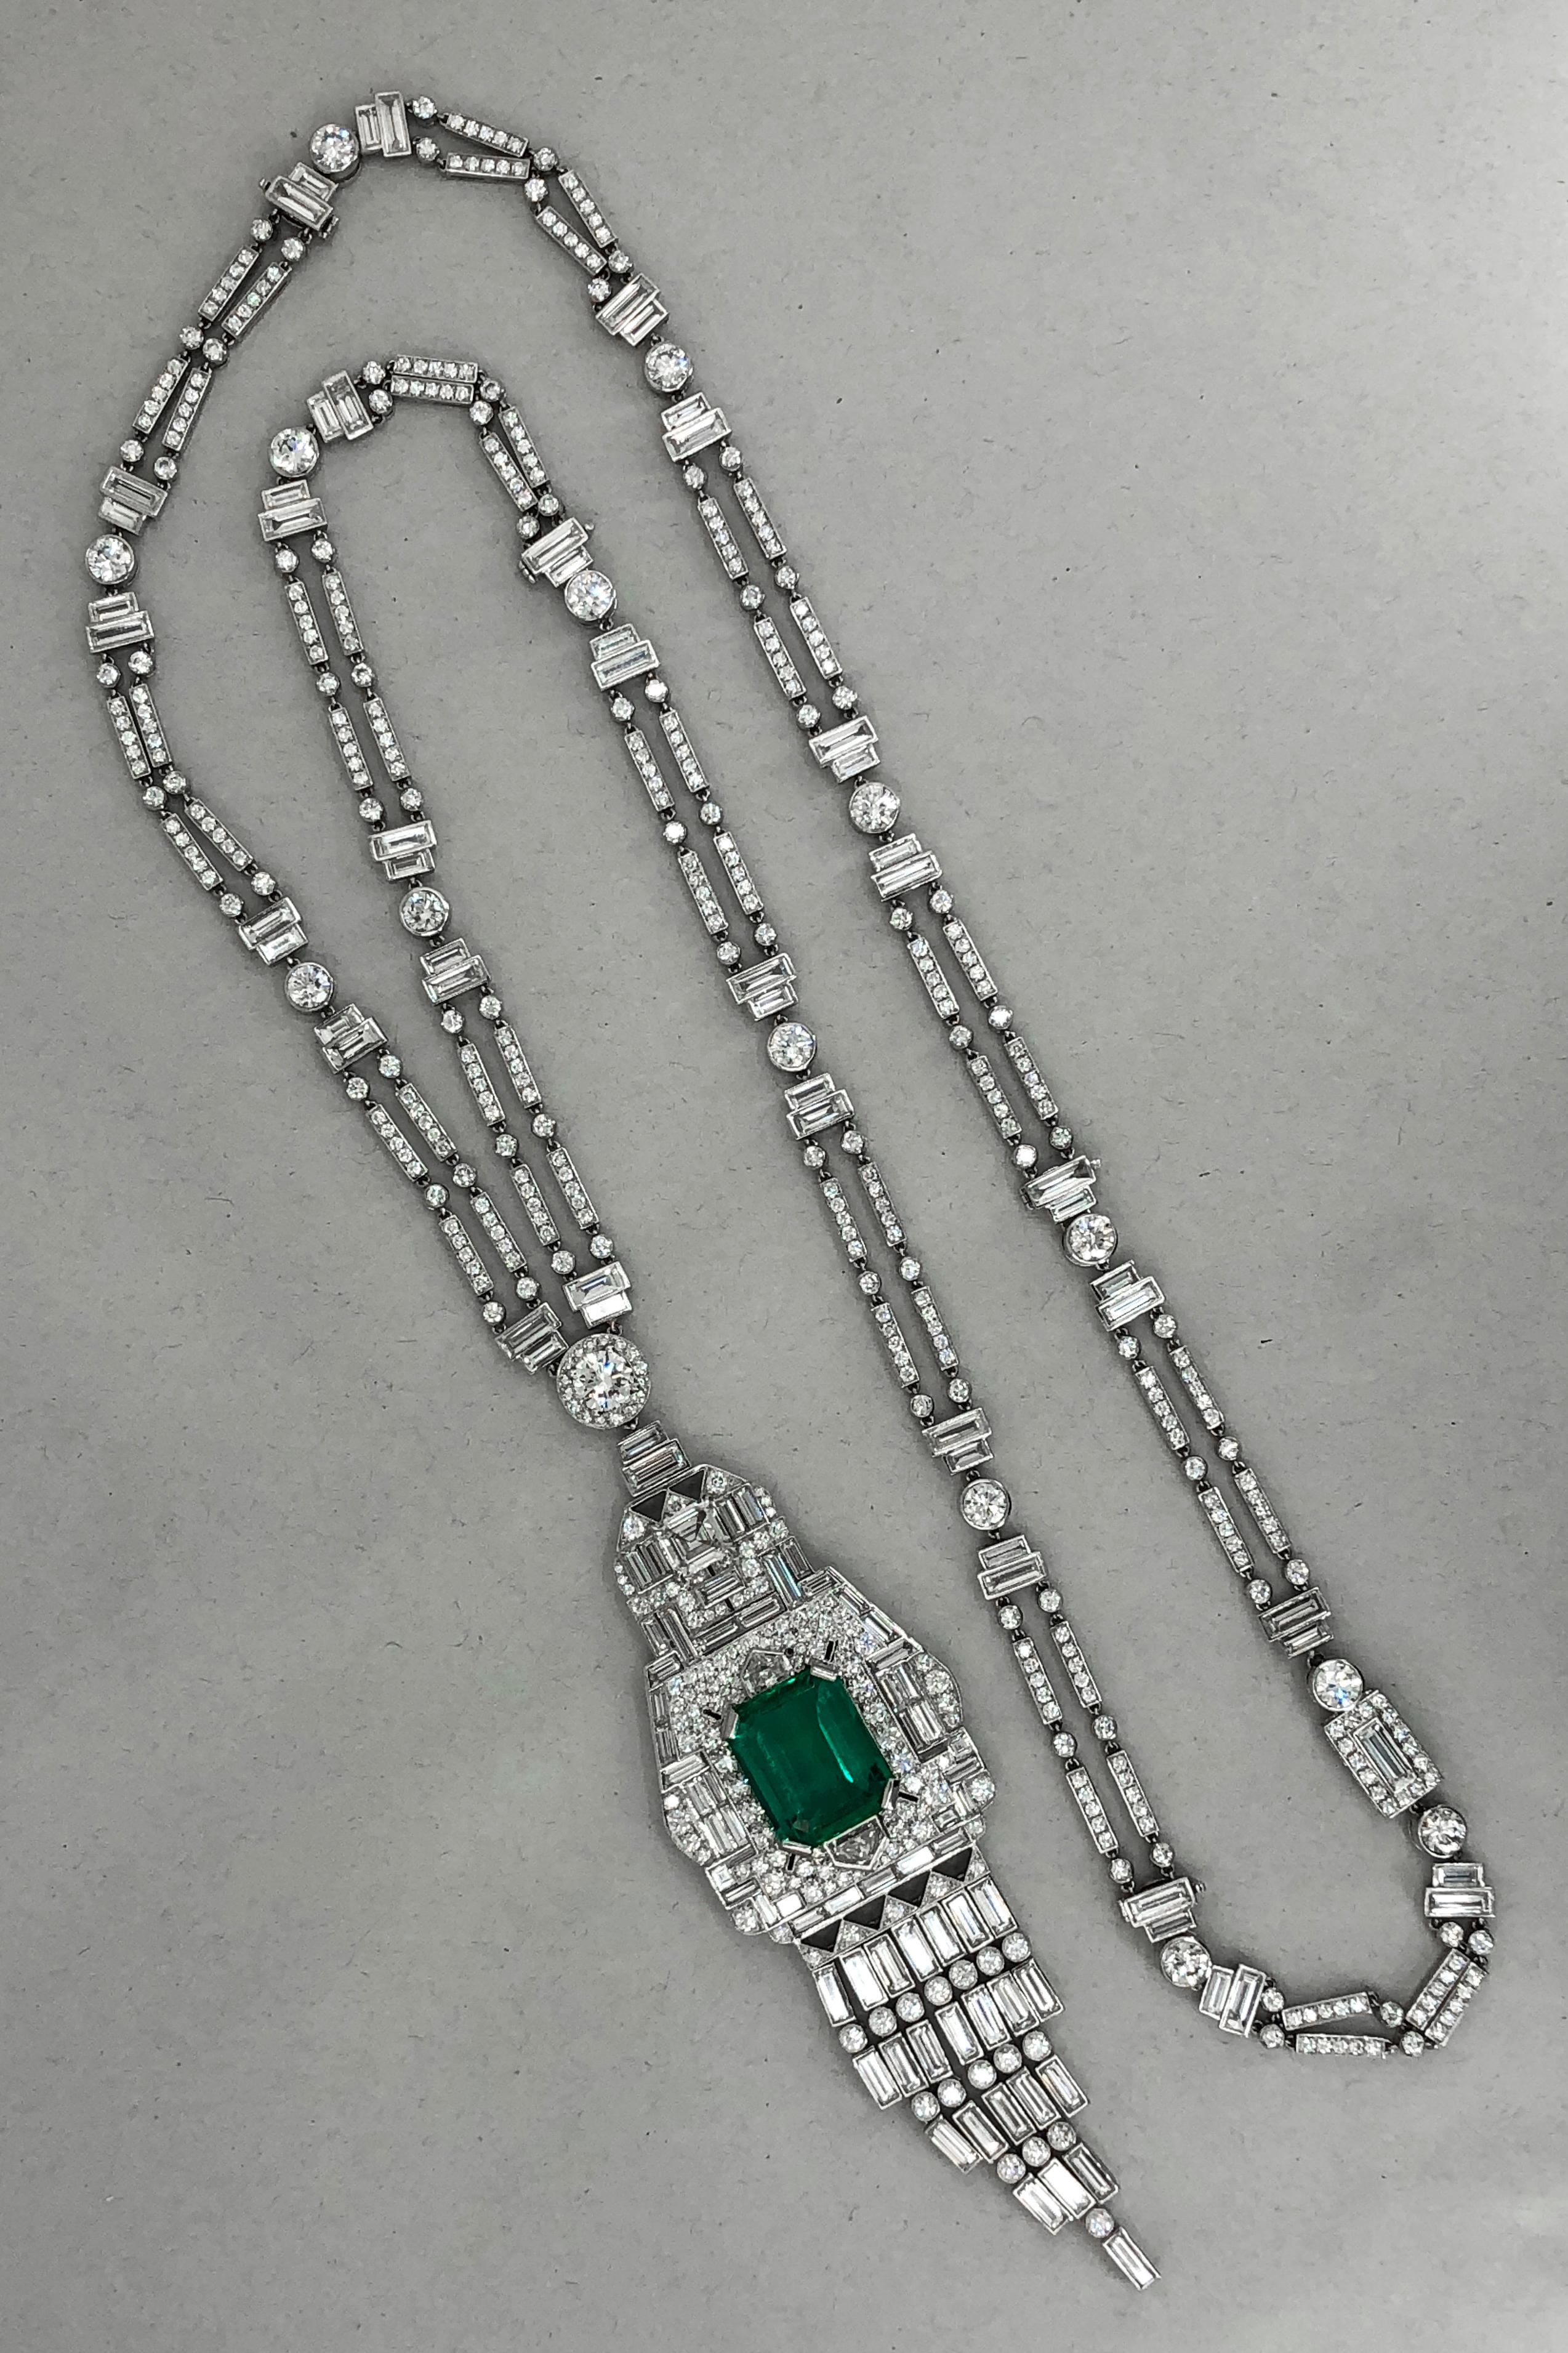 Important Rare Art Deco Diamond Certified Emerald Platinum Necklace
The Colombian Emerald weighing approx. 17.08 with GUBELIN cert.
Reference No: N2040
Significance
The 1925 Paris Exposition Internationale des Arts Décoratifs et Industriels Modernes